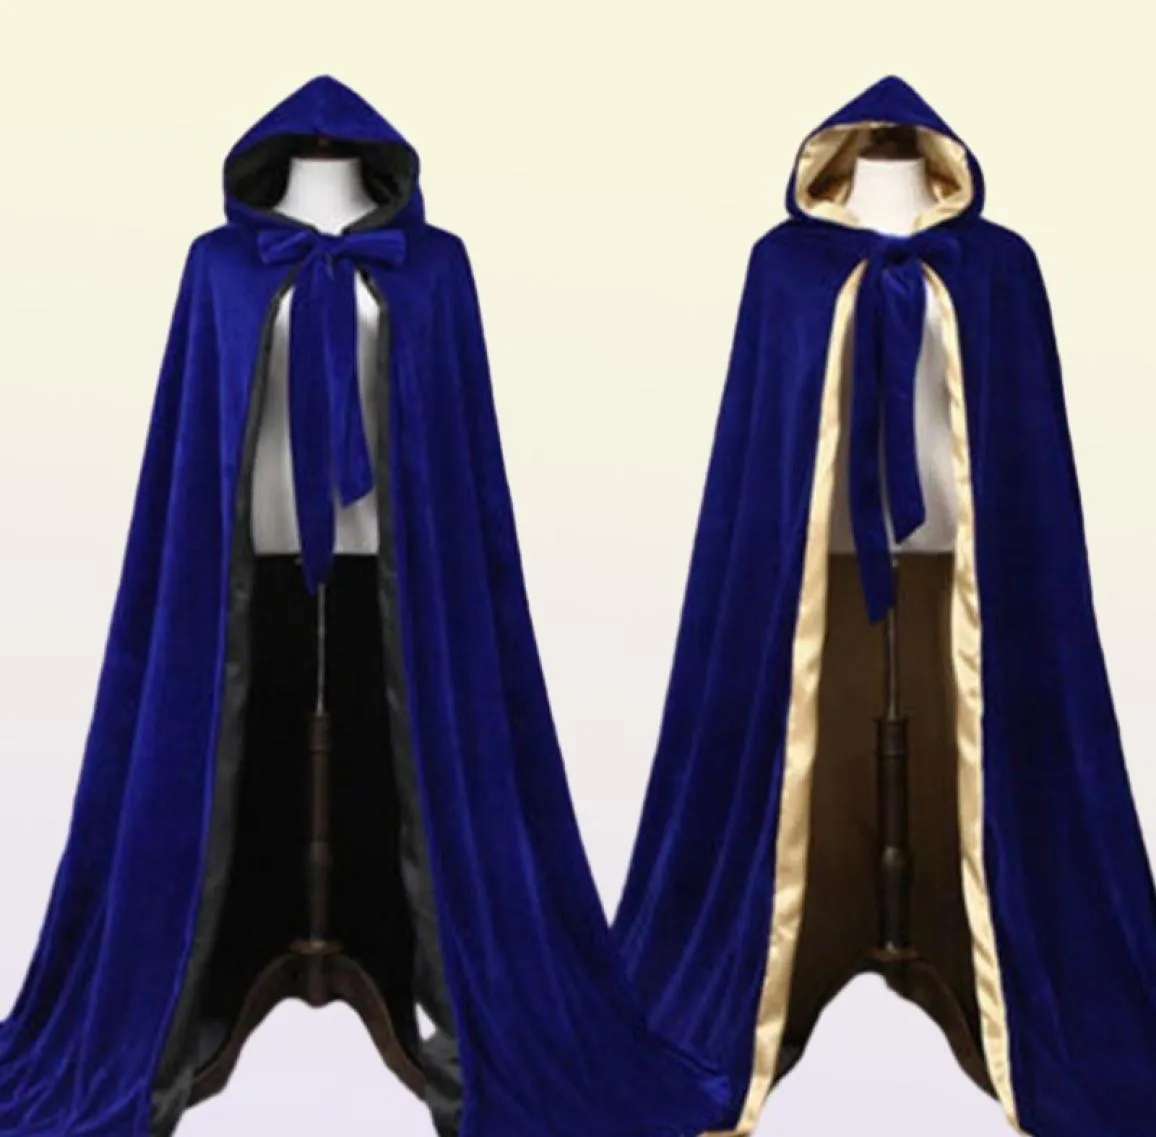 Wraps Jackets Elegant Pageant Velvet Cloak Luxury Europe Style Robe Medieval Cape Shawl Party Queen Princess Wedding4487621